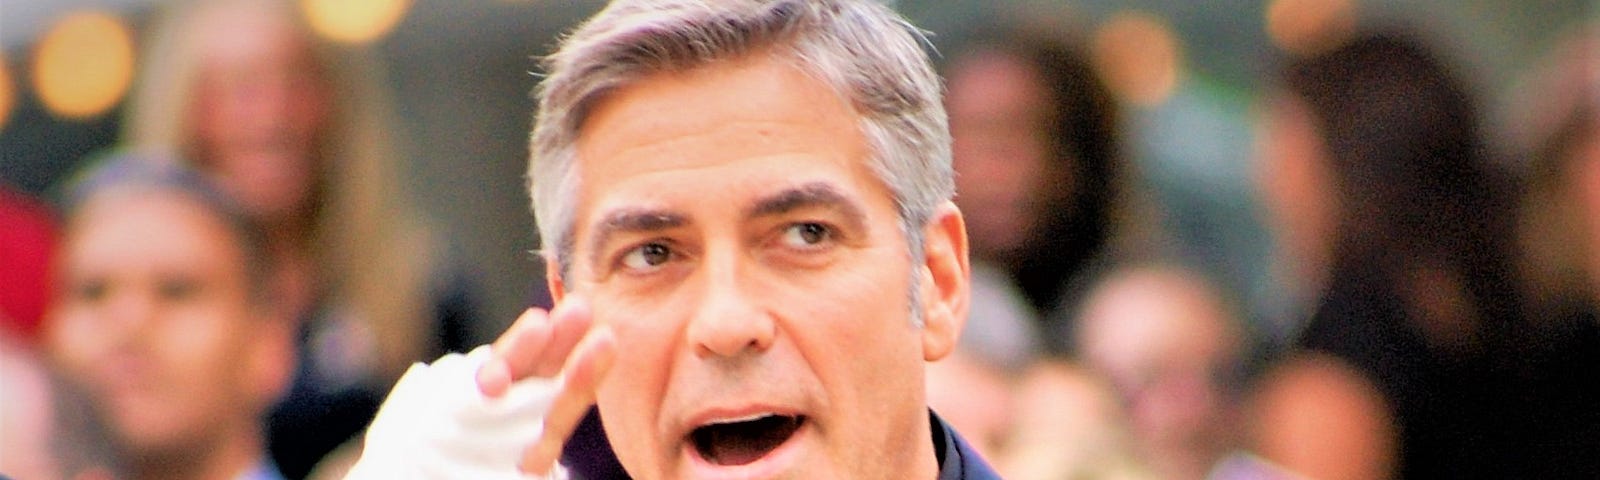 How Do You Pay Back Your Friends, Ask George Clooney